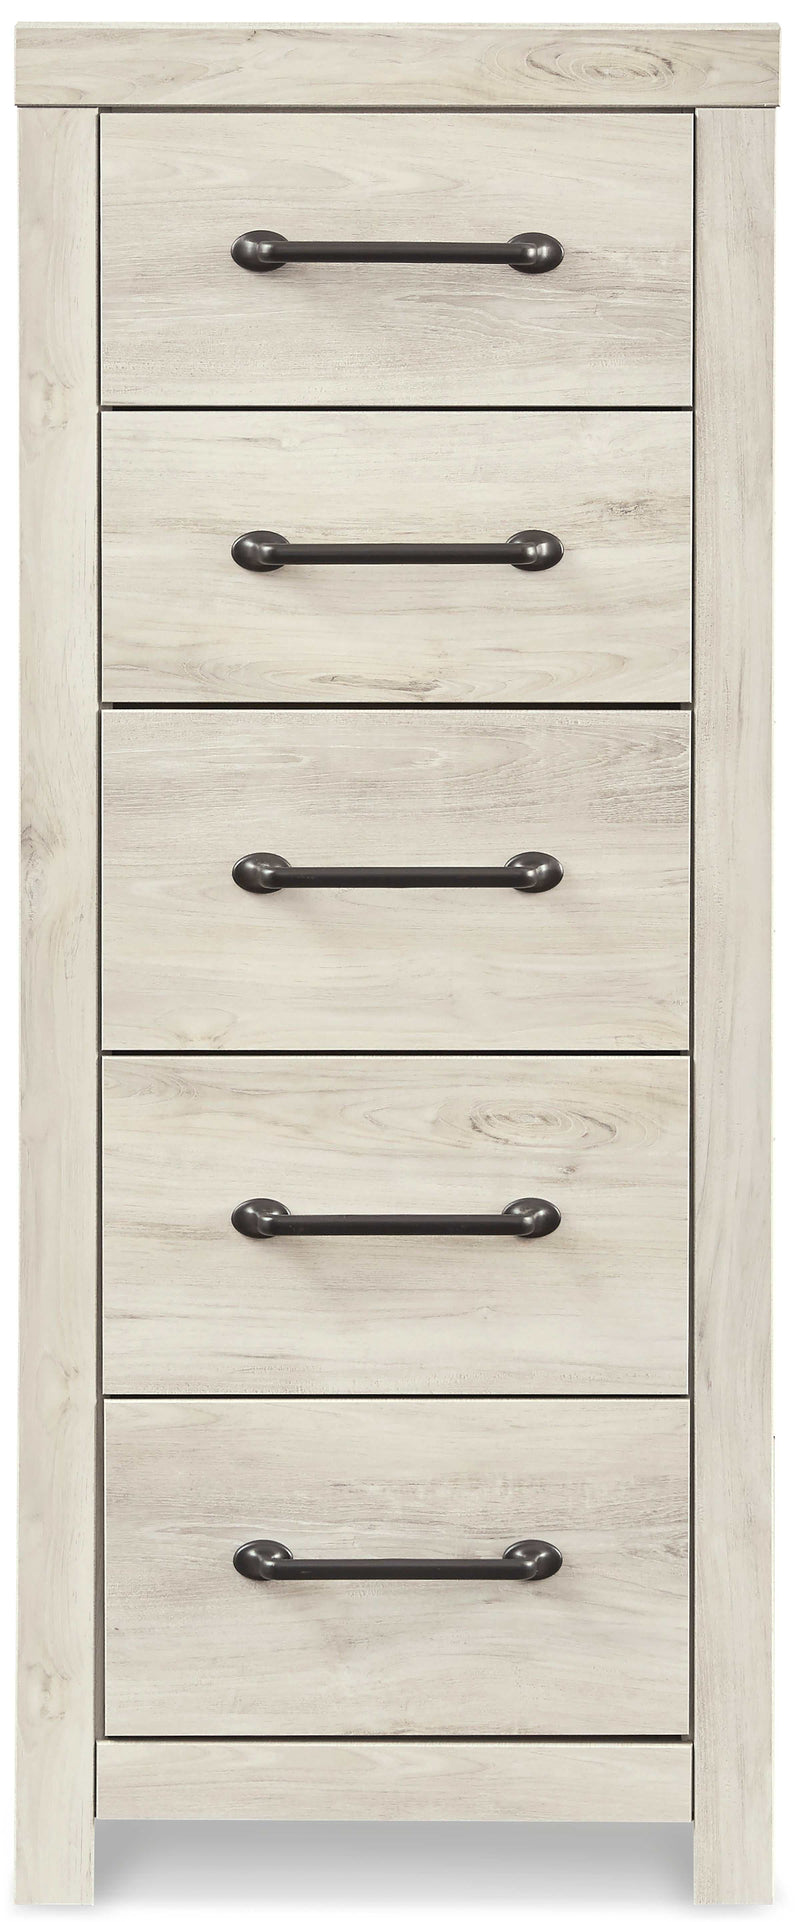 Cambeck Whitewash Narrow Chest of Drawers - Ornate Home